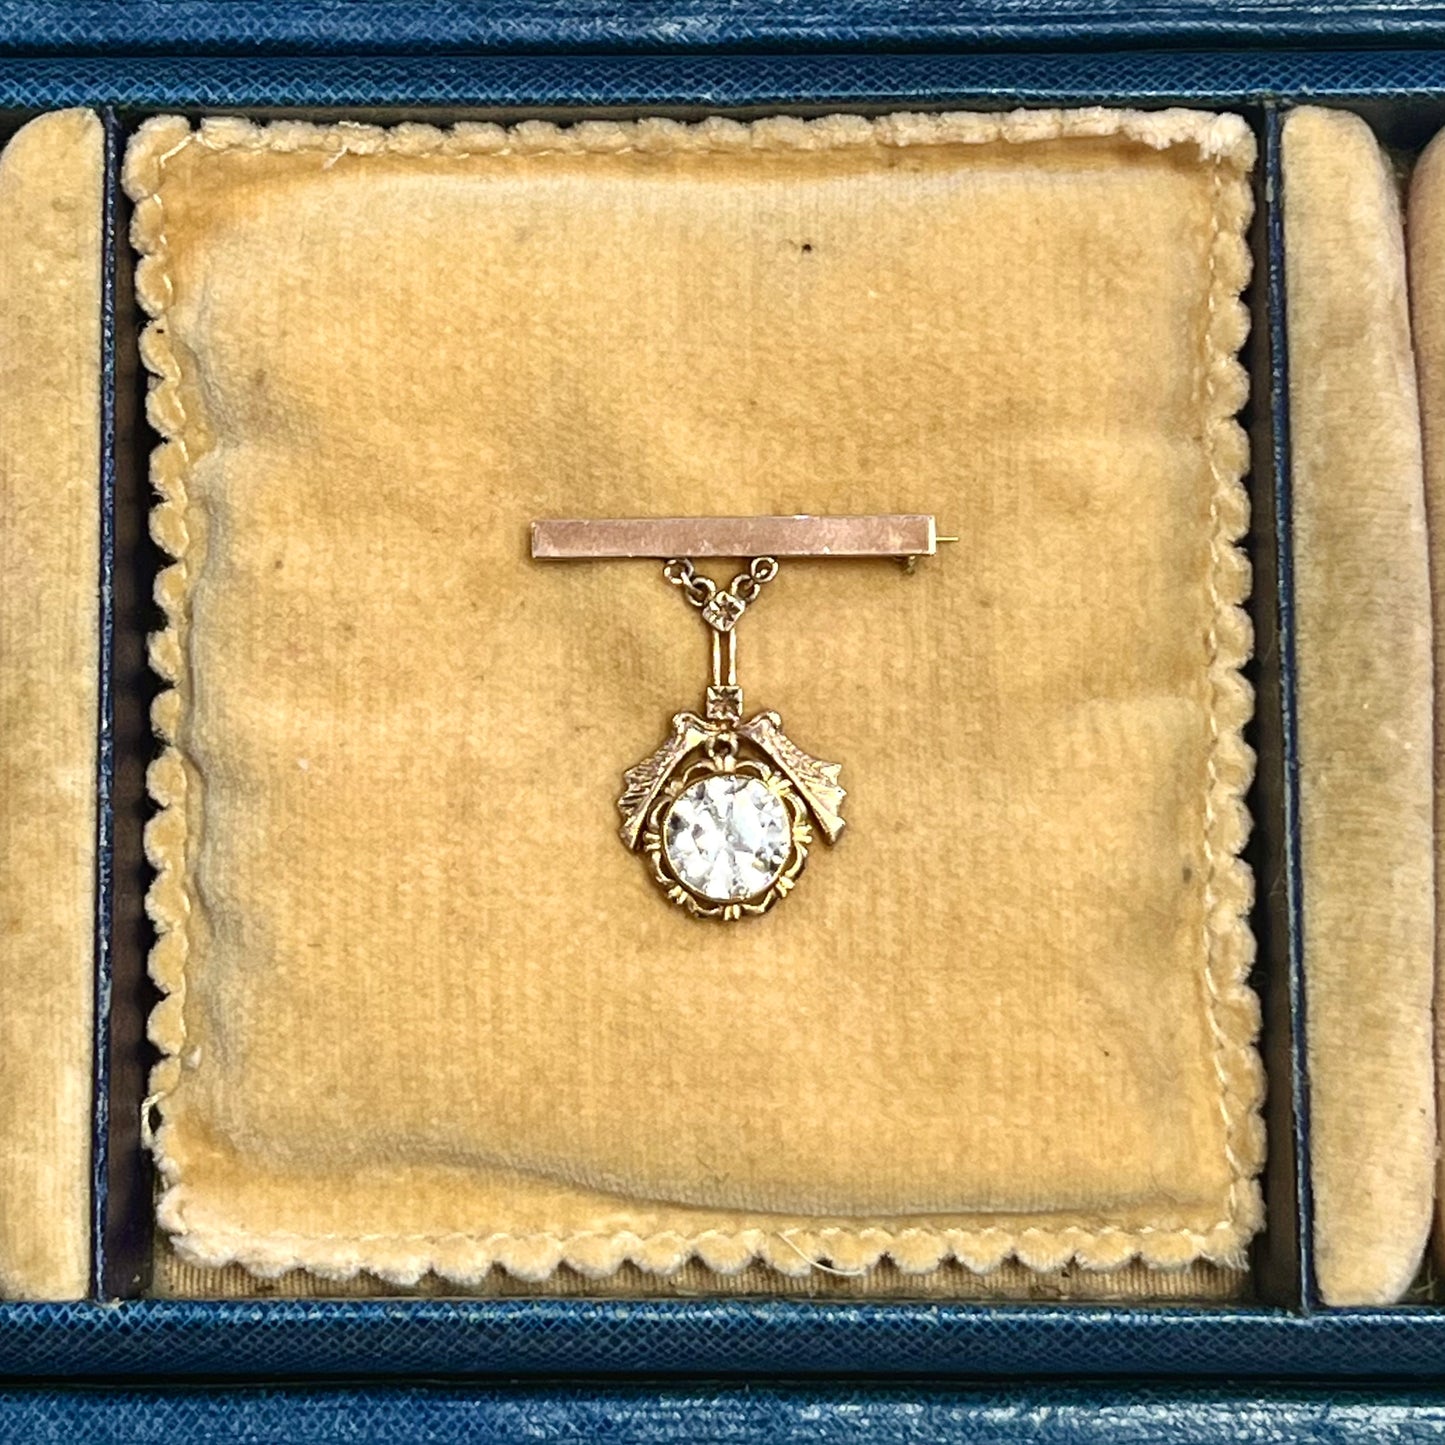 9ct yellow gold bar brooch, with wreath detail and sparkling diamond paste drop. Circa 1940s to 60s